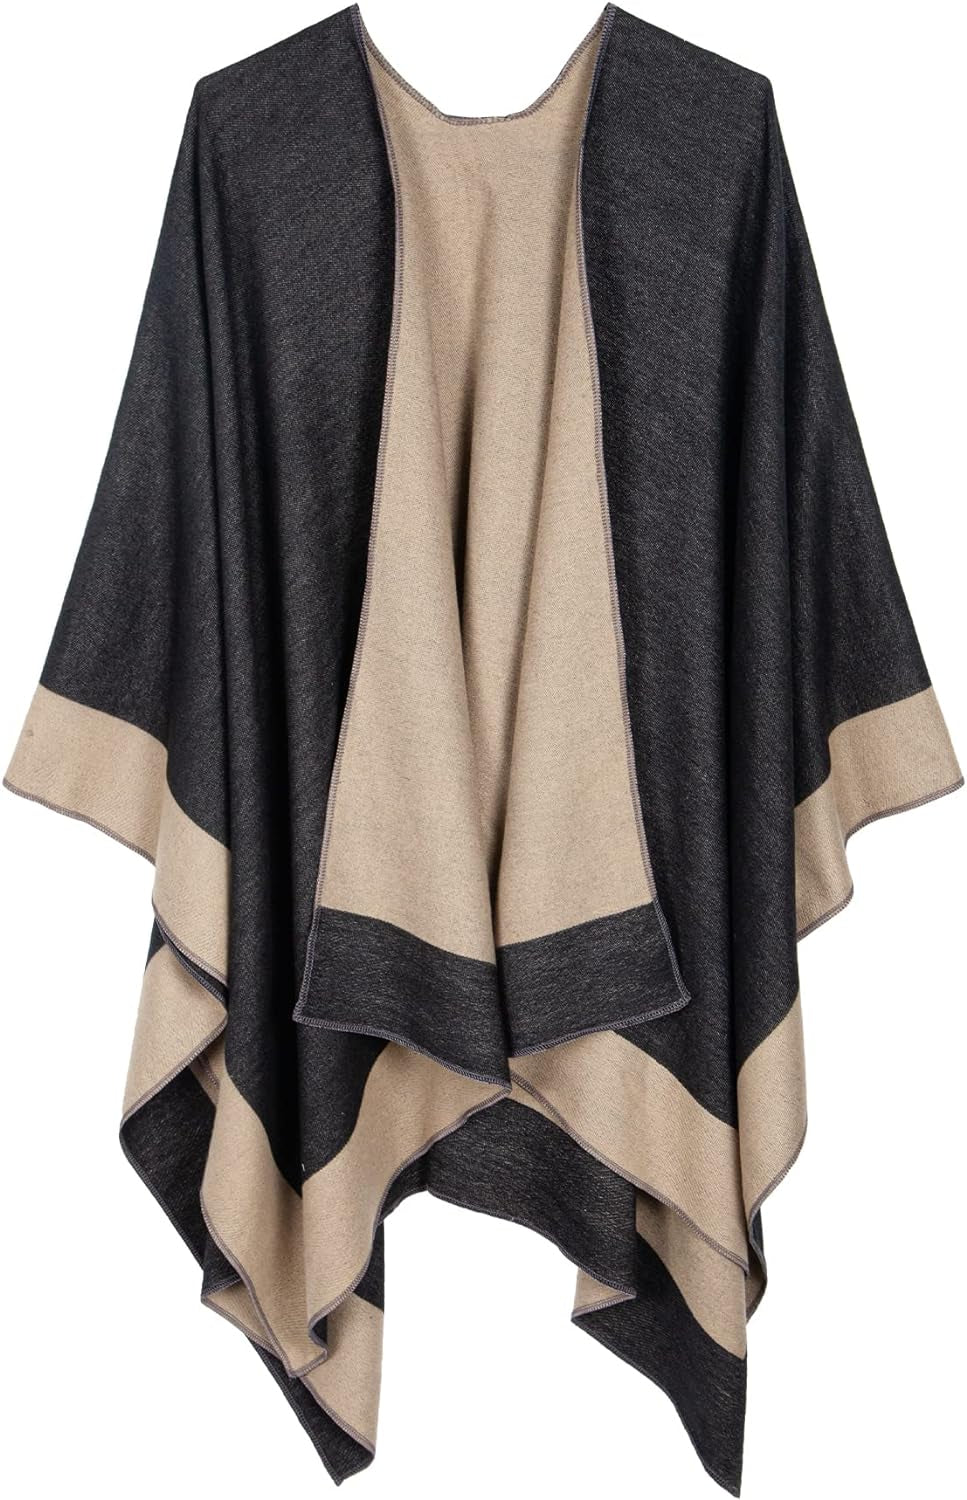 Ladies Printed Poncho Cape Reversible Oversized Shawl Wrap Open Front Cardigans for Women